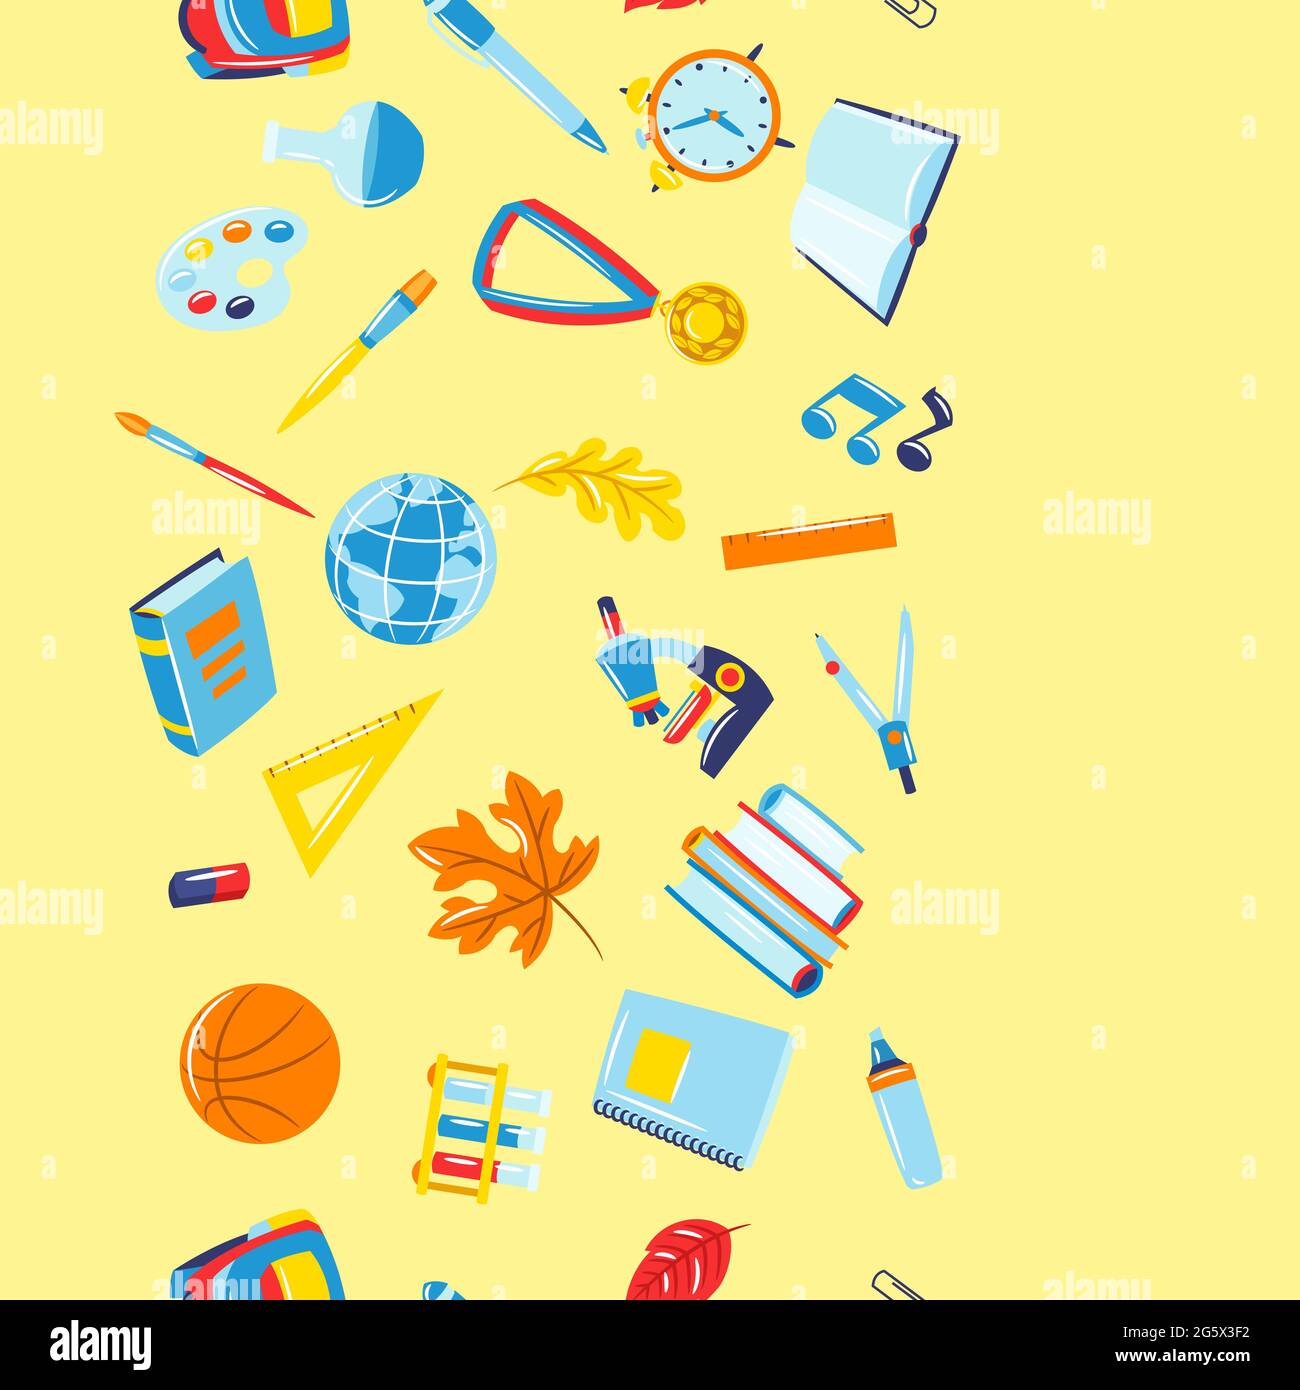 School seamless pattern with education items. Supplies and stationery background. Stock Vector